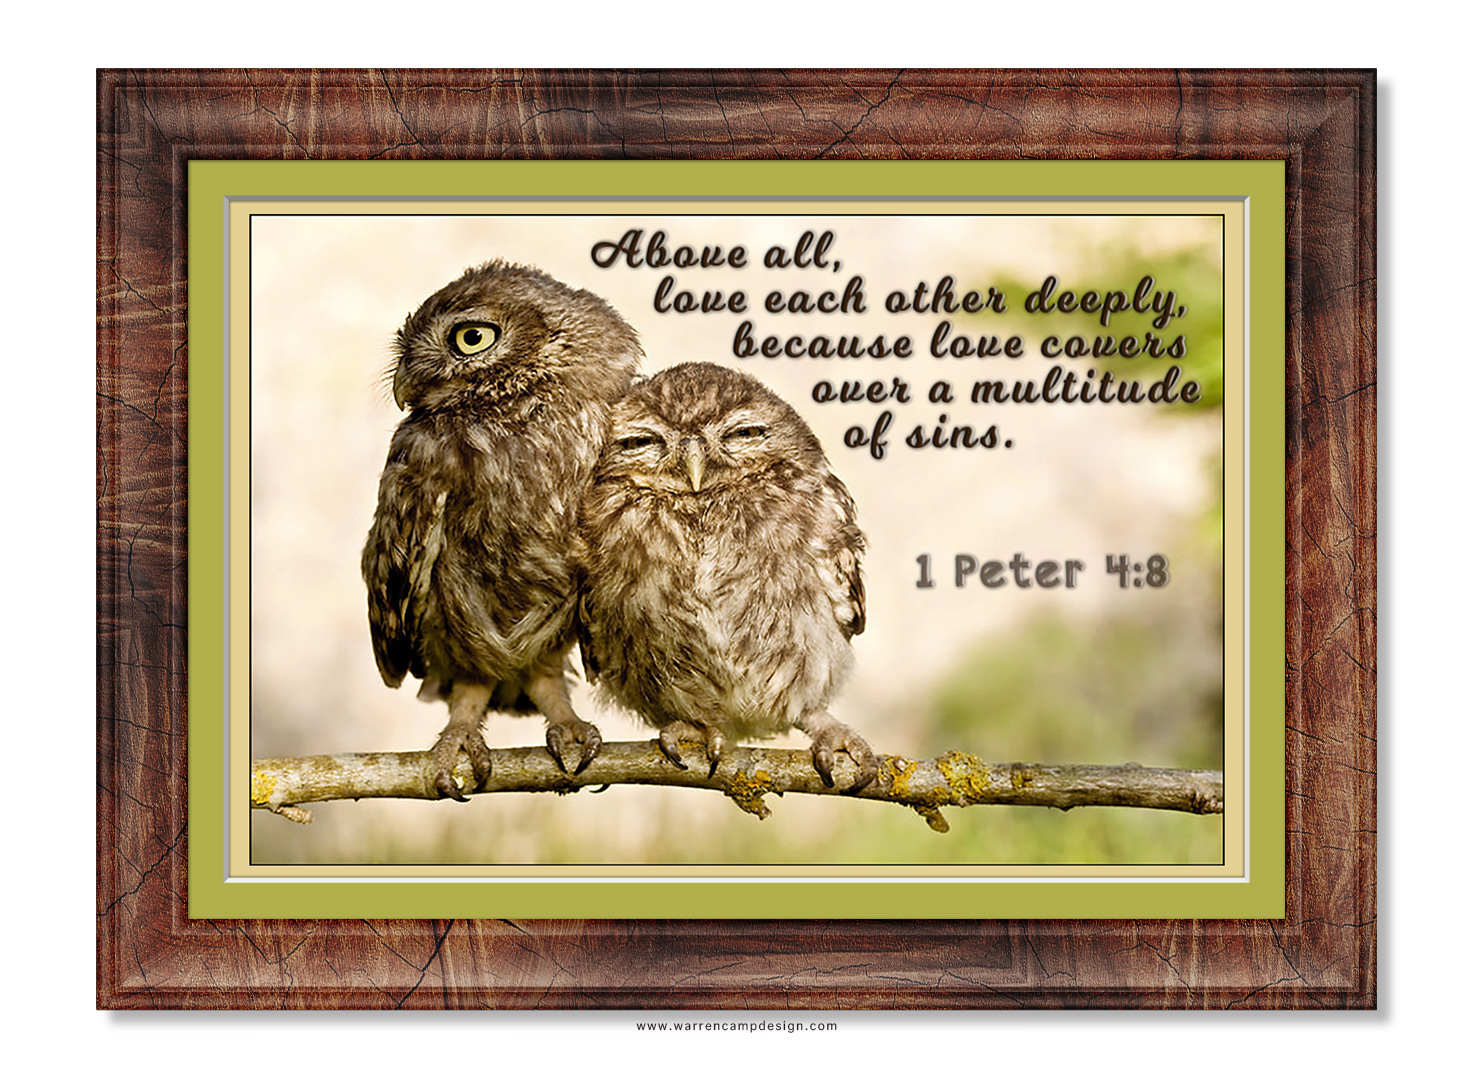 Scripture picture of 1st Peter 4:8, emphasizing the importance of loving people deeply.